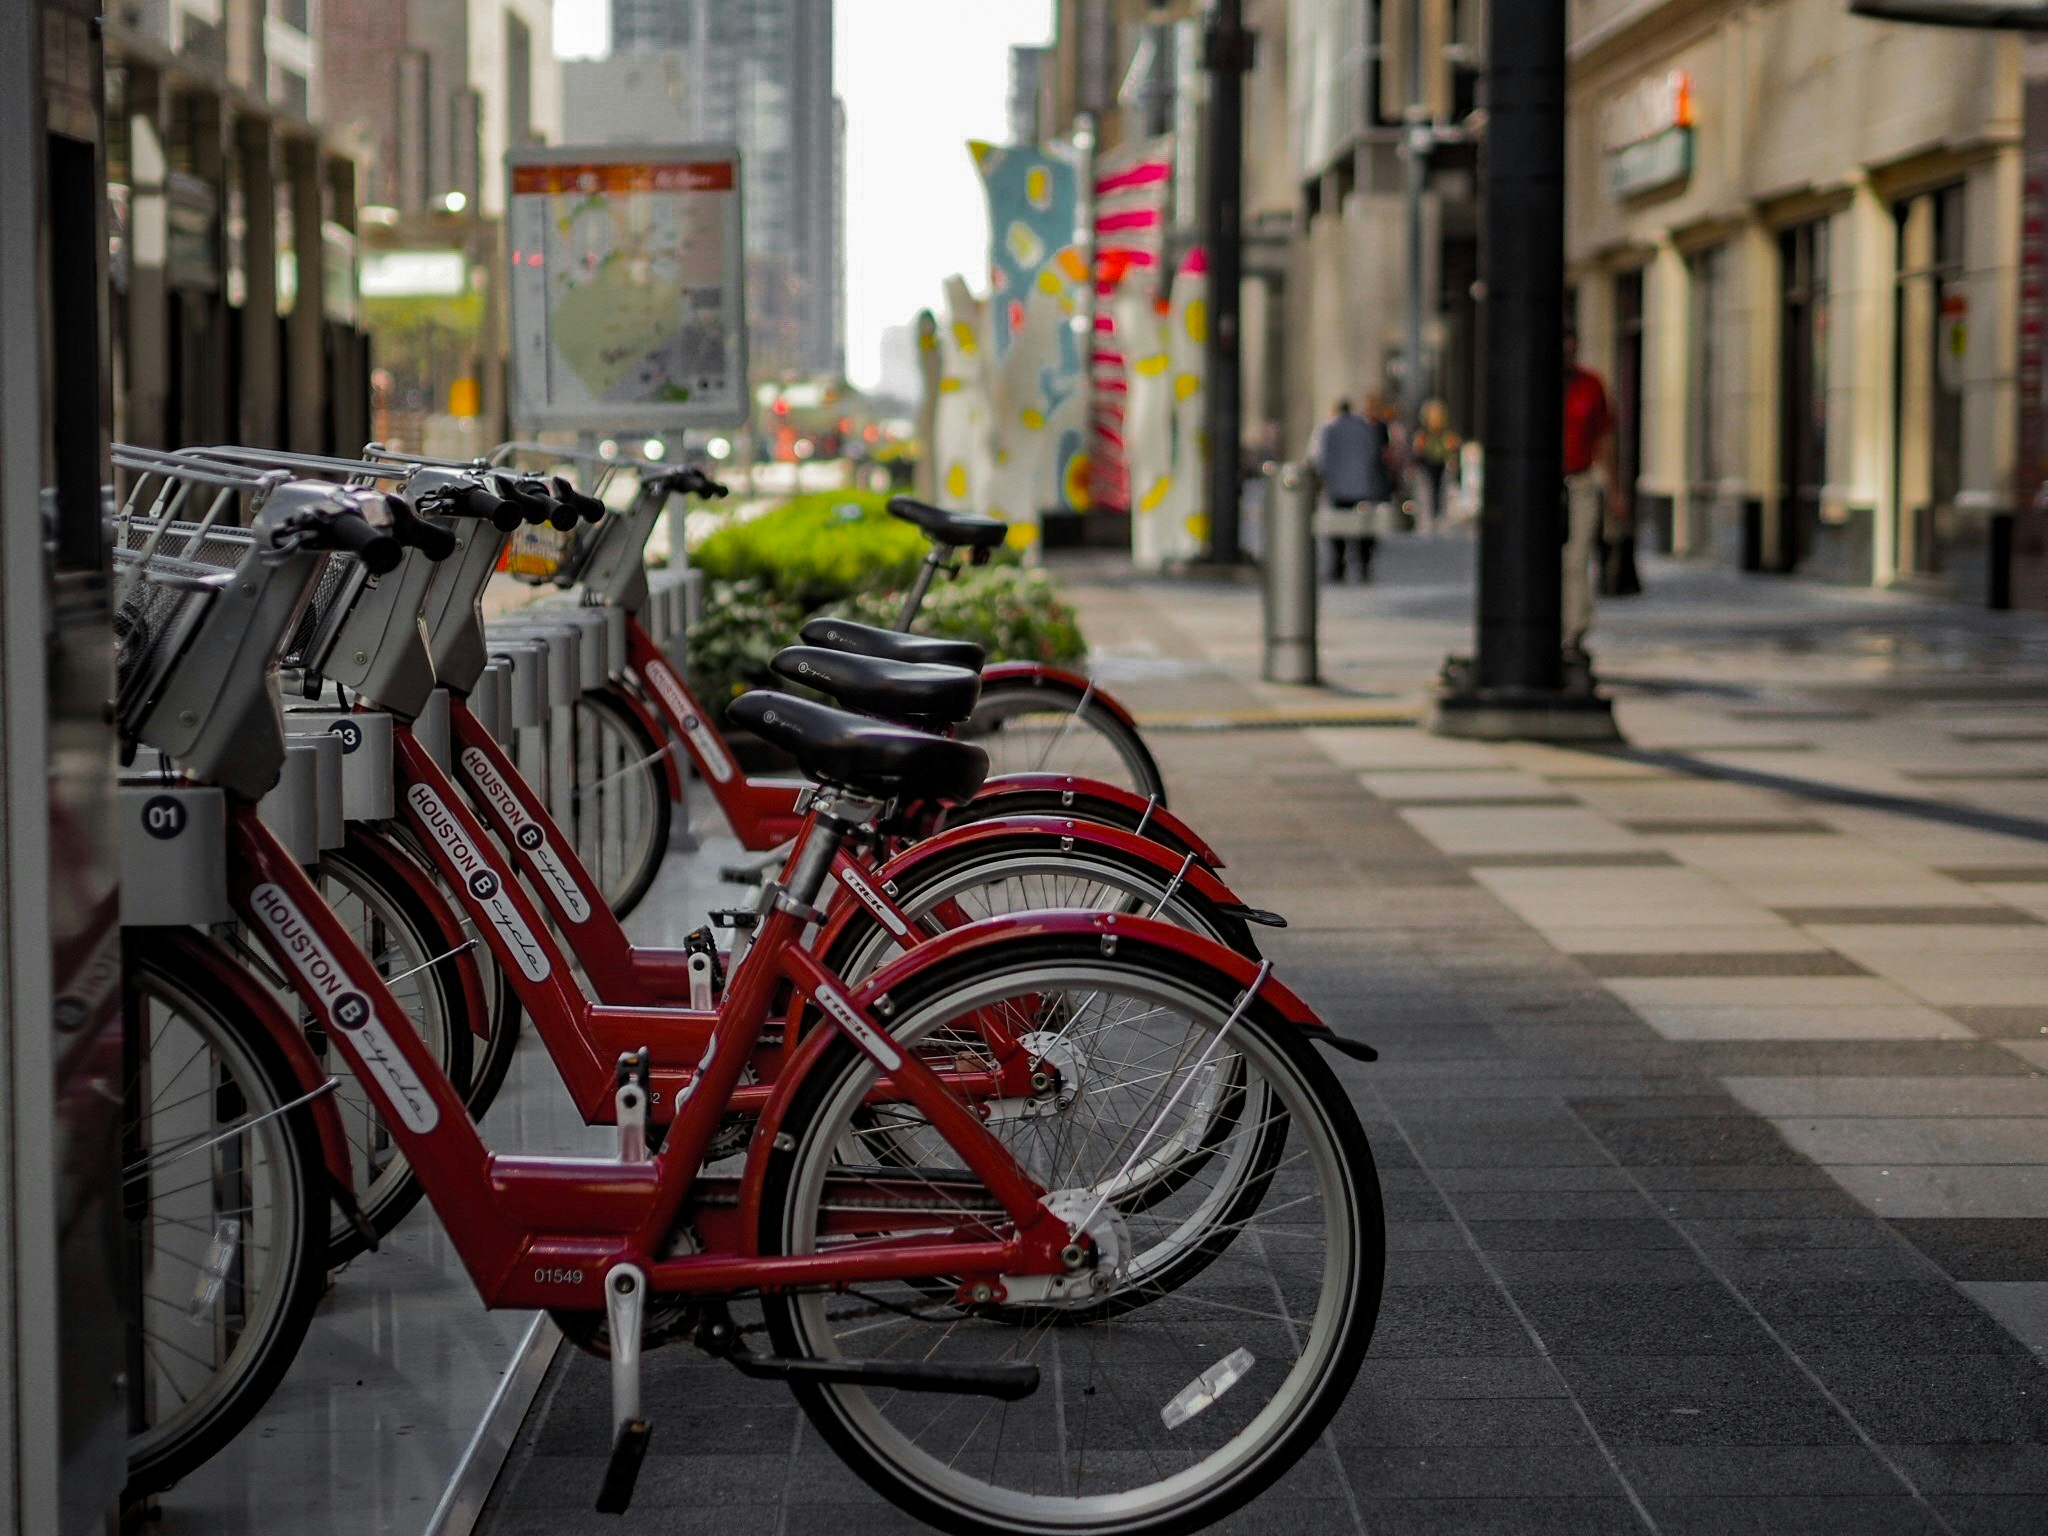 a row of bicycles parked next to each other in front of buildings